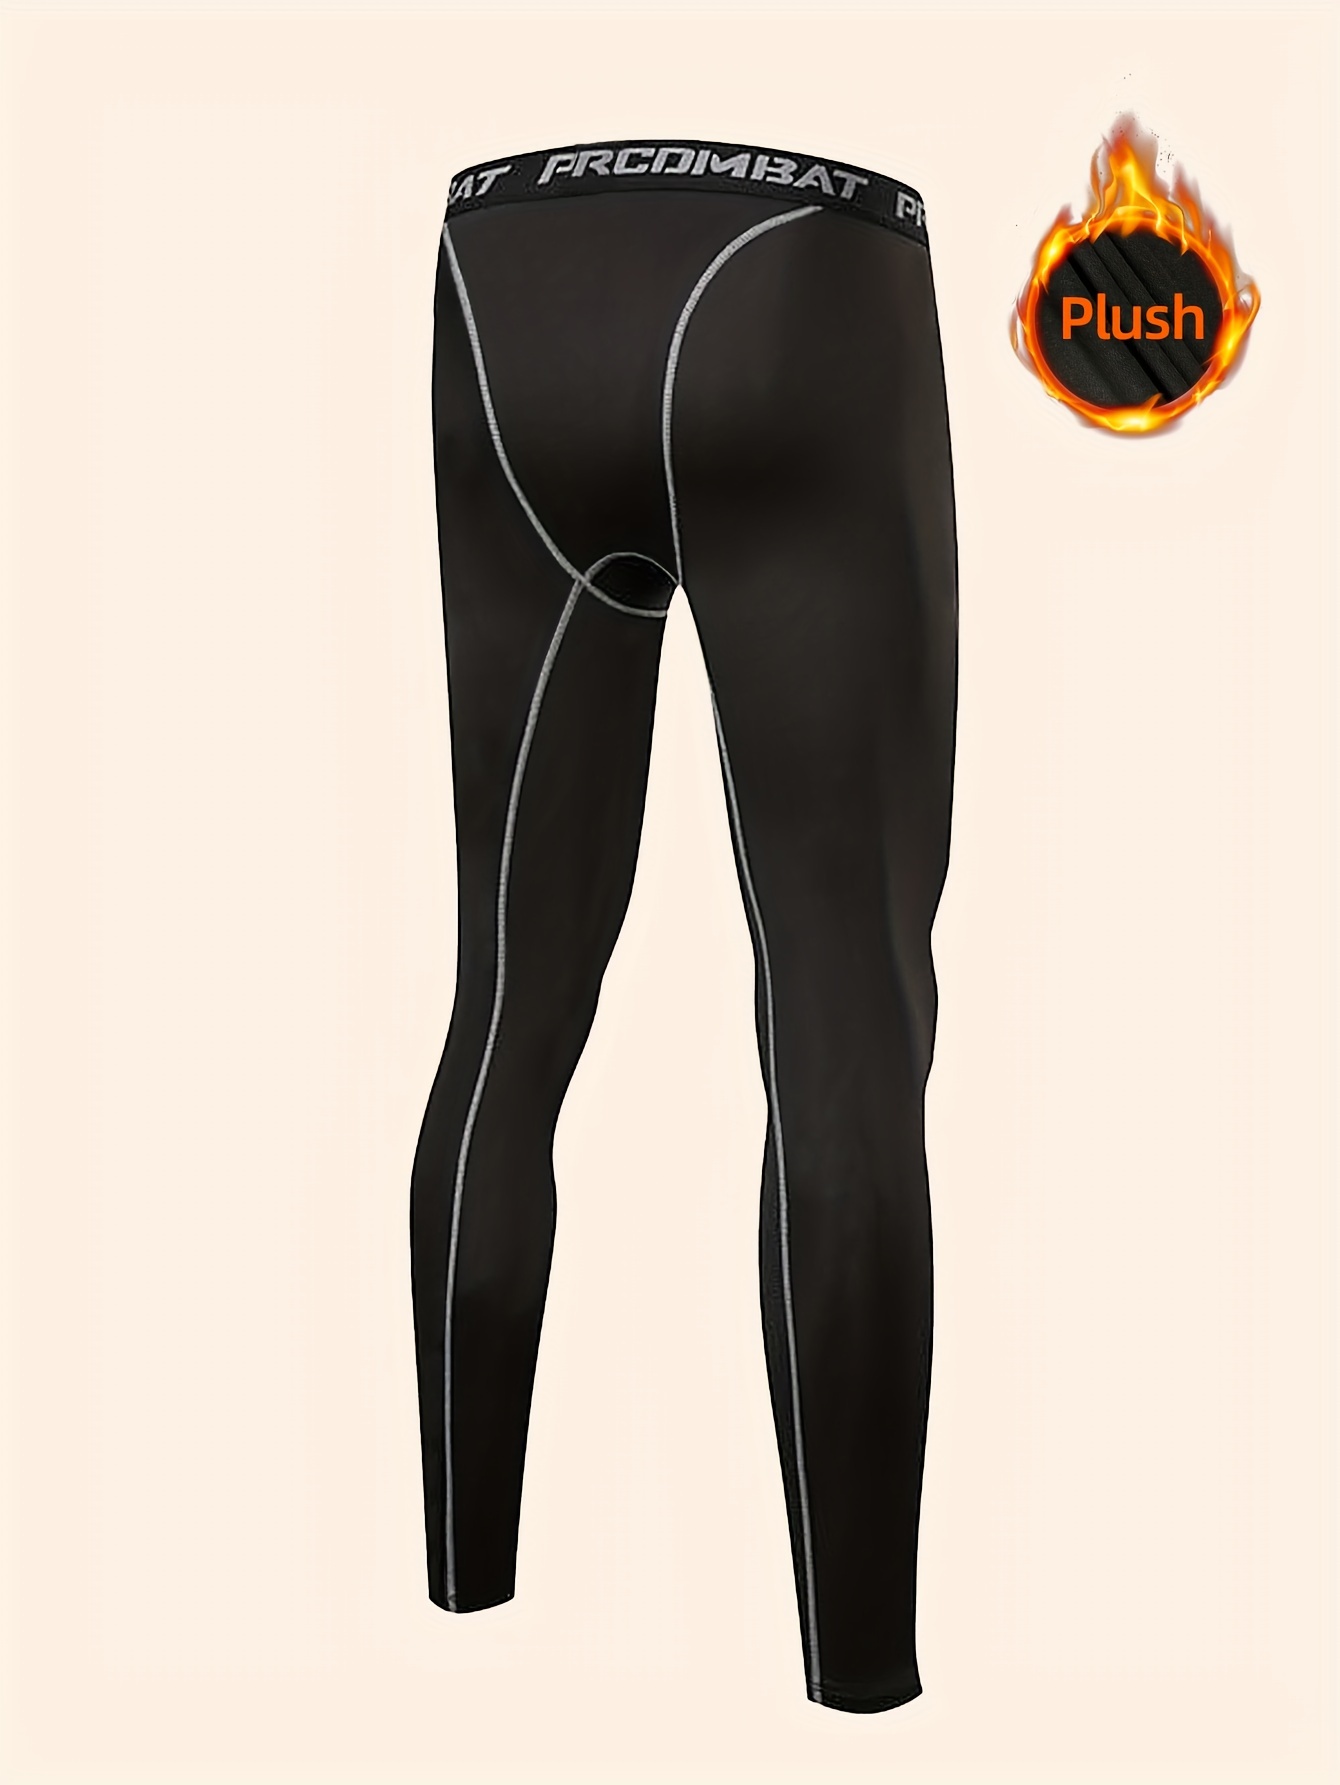 Products  Mens tights, Sportswear leggings, Compression tights